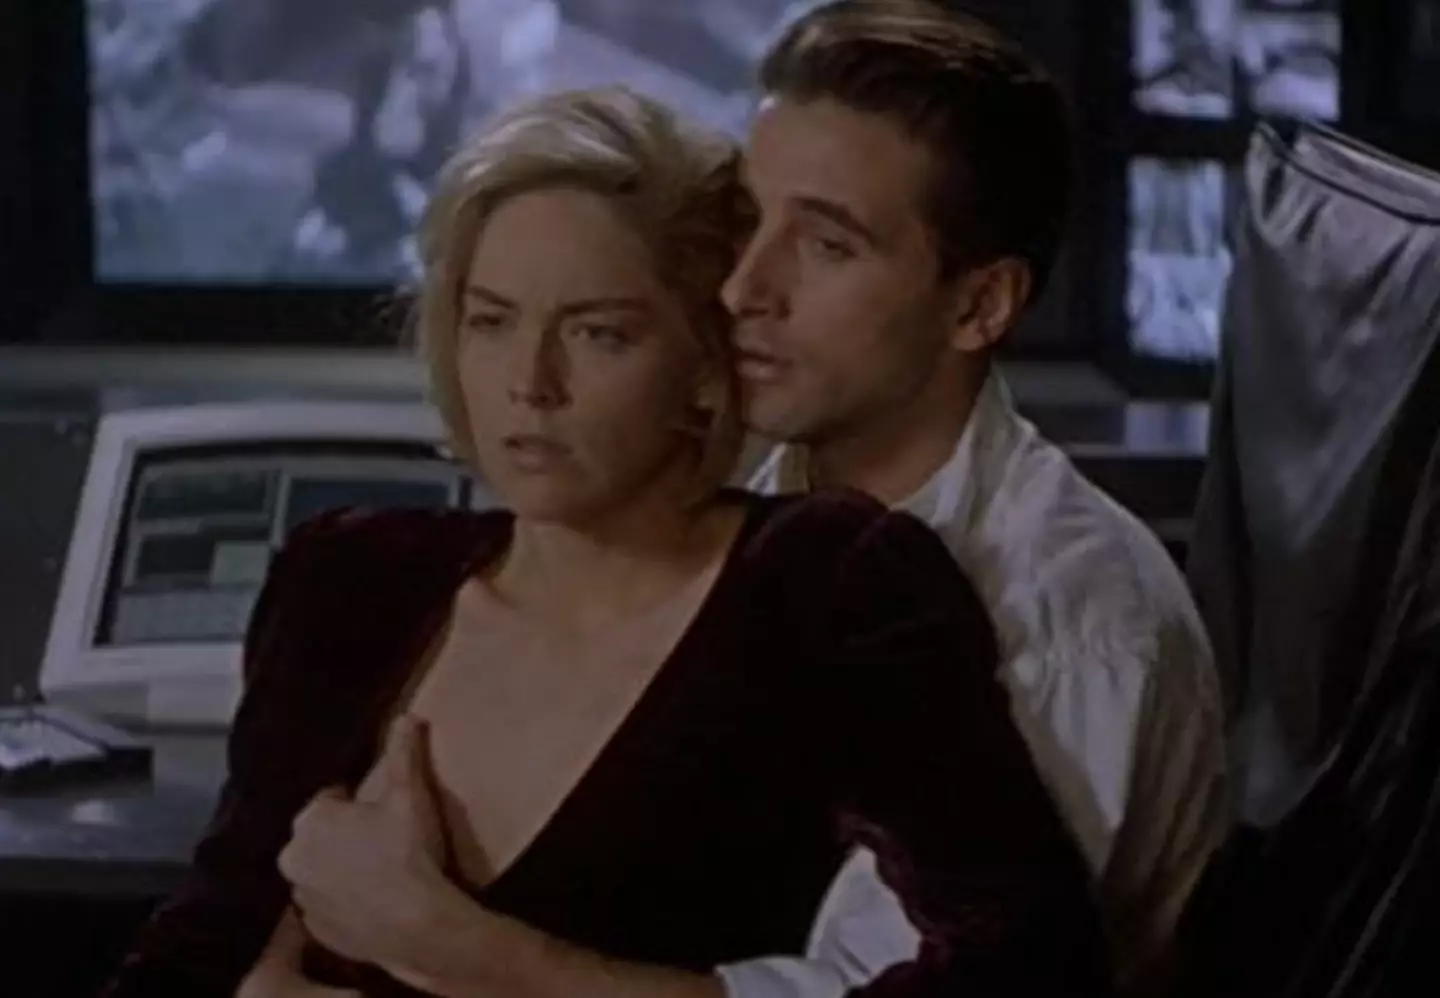 Sharon Stone and Billy Baldwin starred alongside one another in 1993 release Silver.